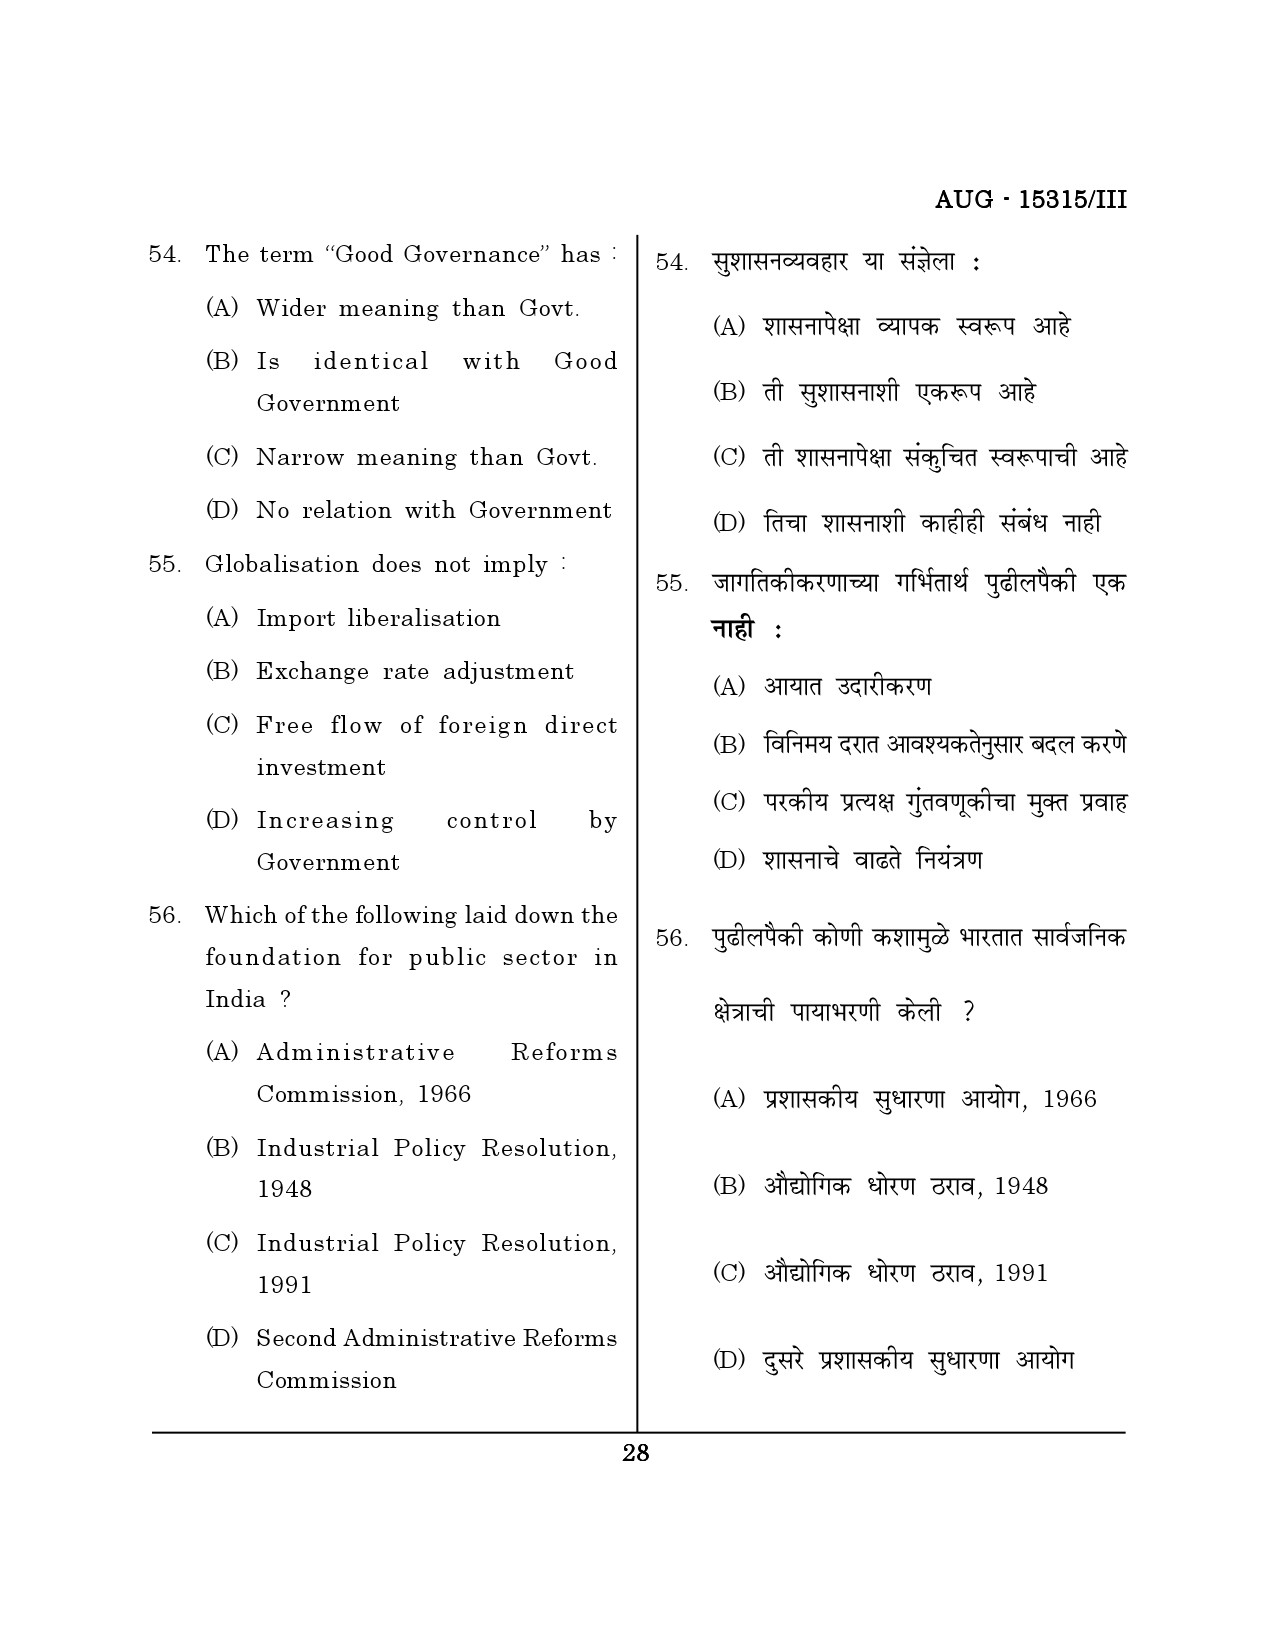 Maharashtra SET Political Science Question Paper III August 2015 27